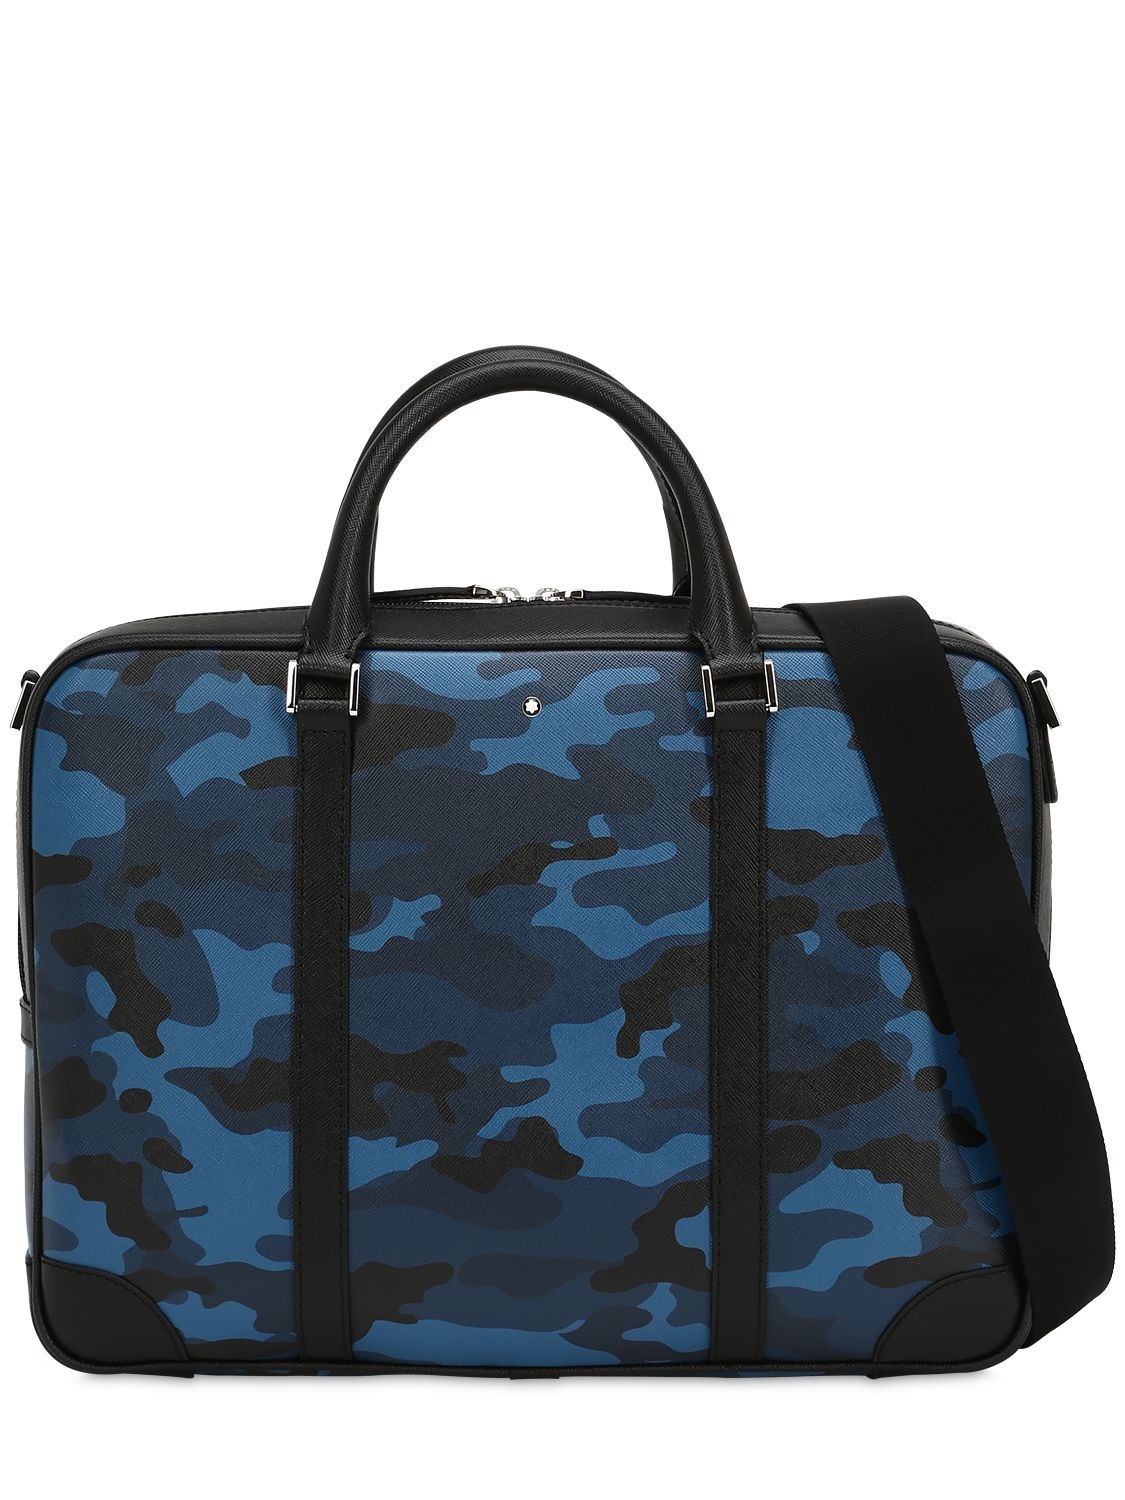 Montblanc Small Camouflage Leather Briefcase Case In Blue Camo